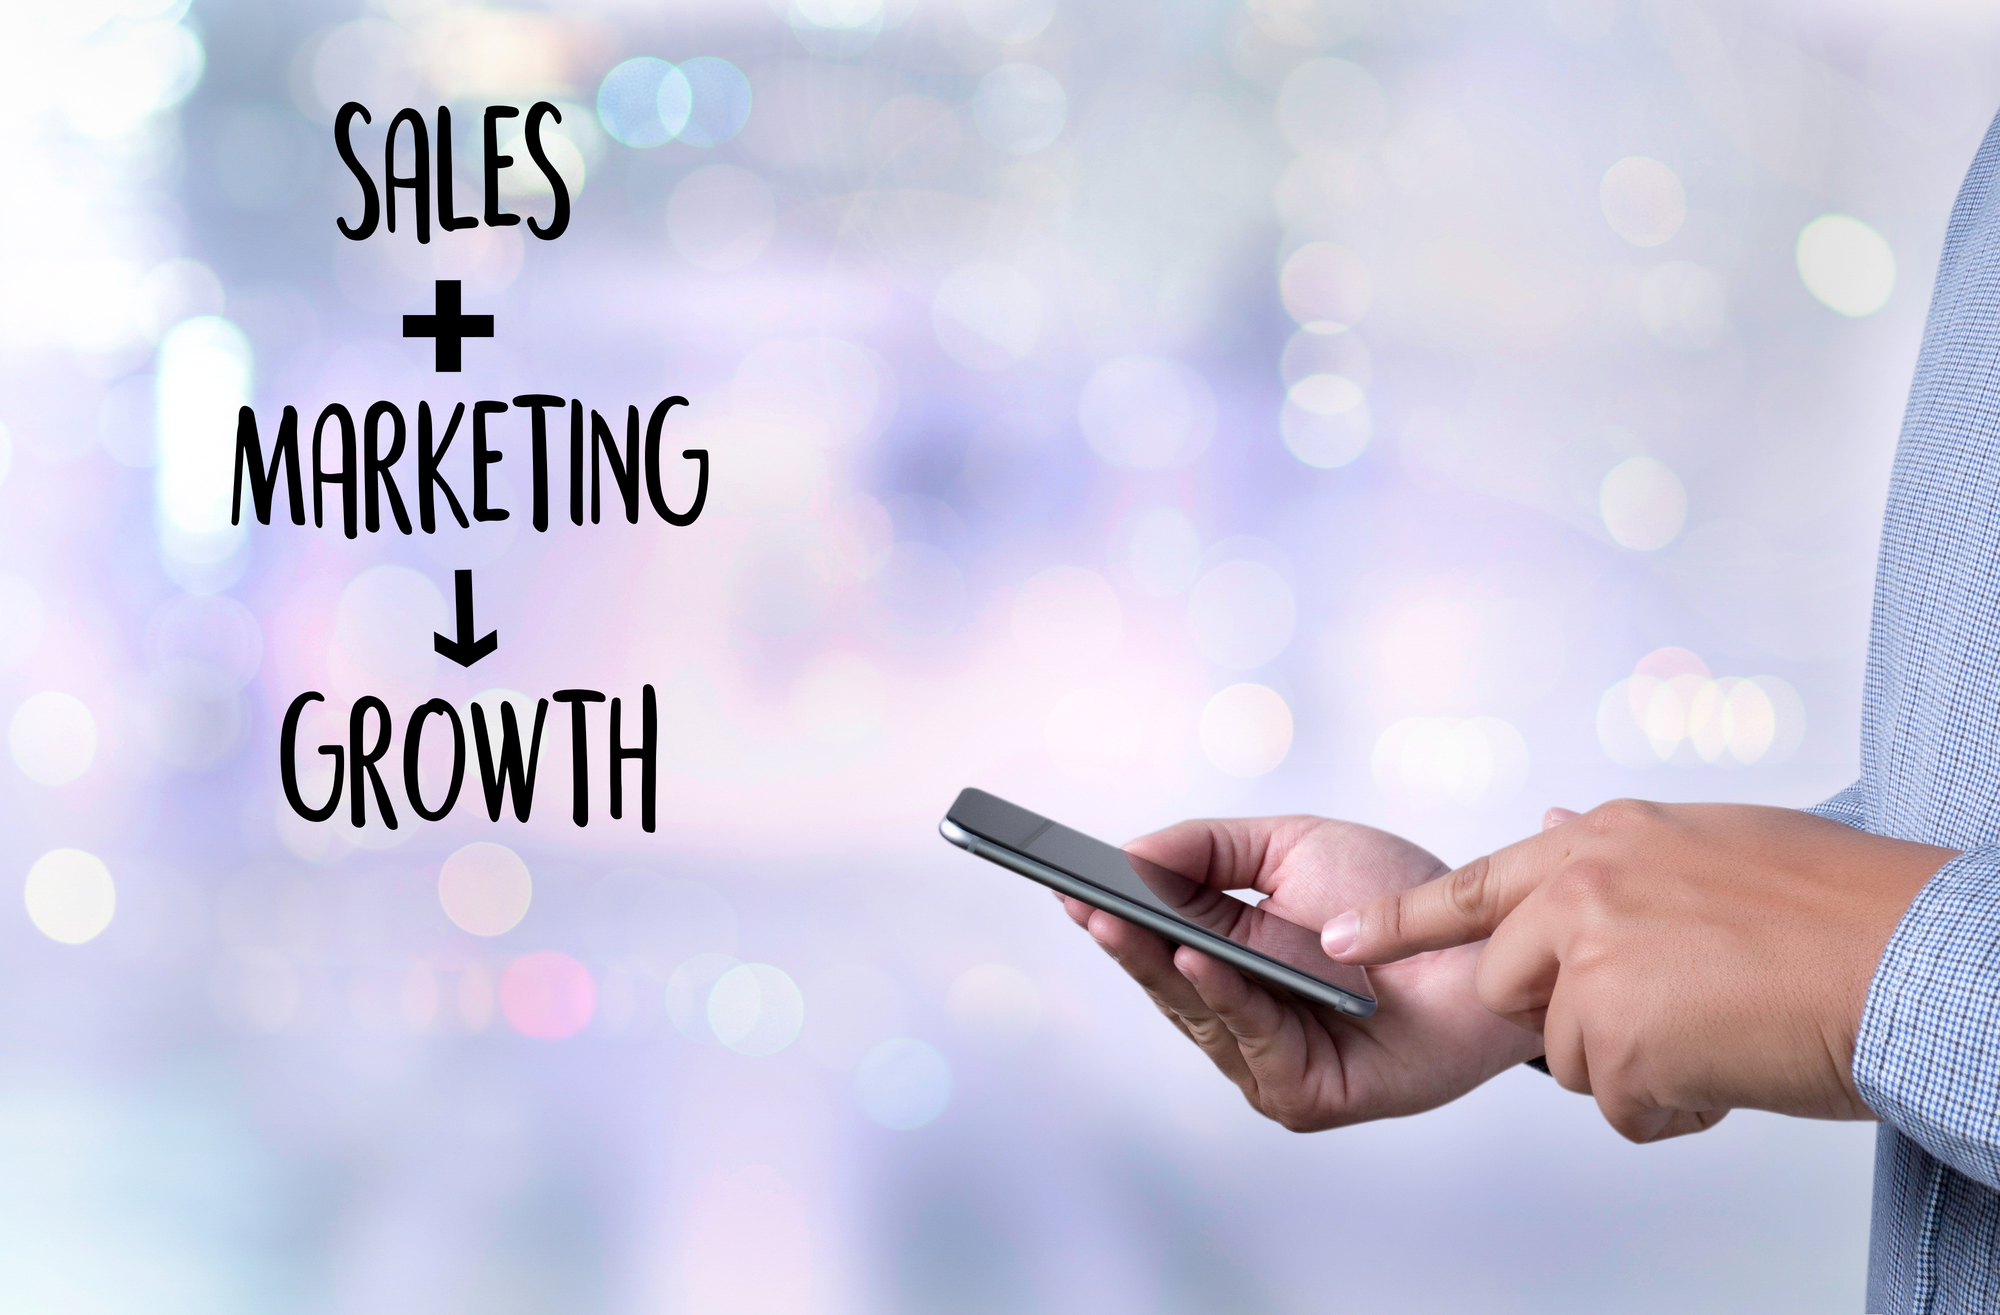 the words-sales-marketing-growth-and0image-of-hand-holding-smartphone